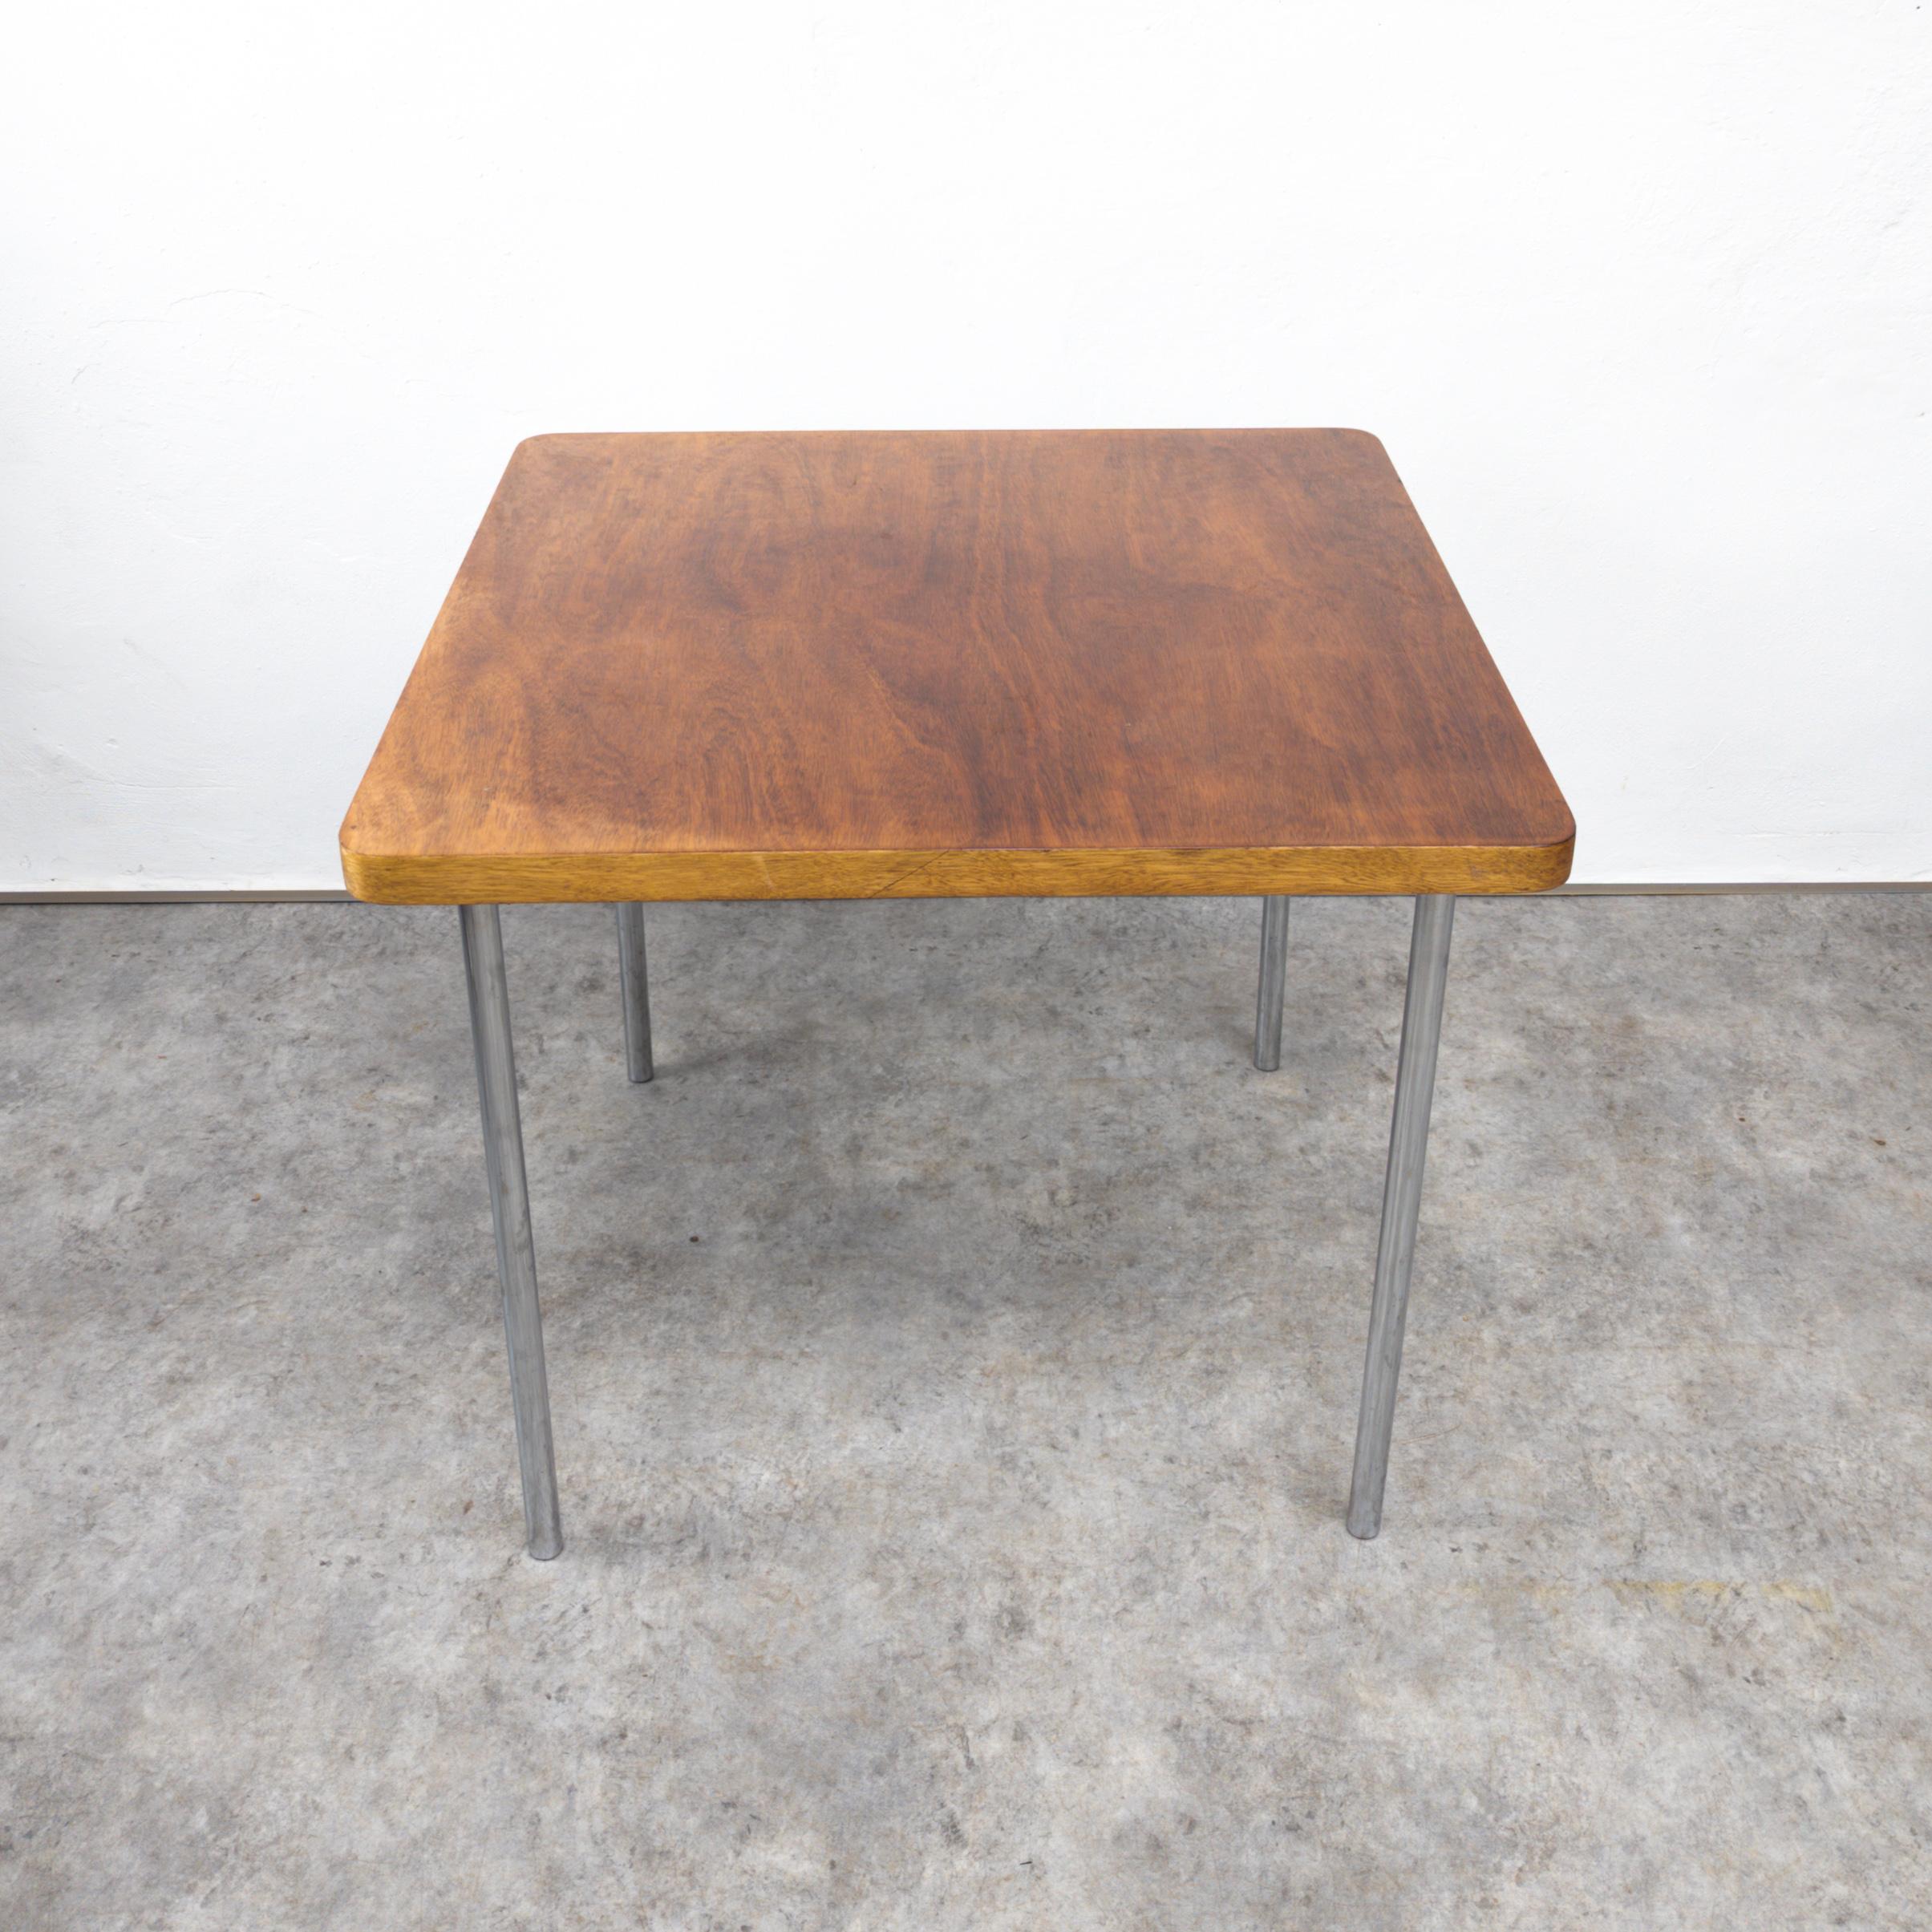 Steel Rare Bauhaus dining table Thonet B 14 by Marcel Breuer  For Sale